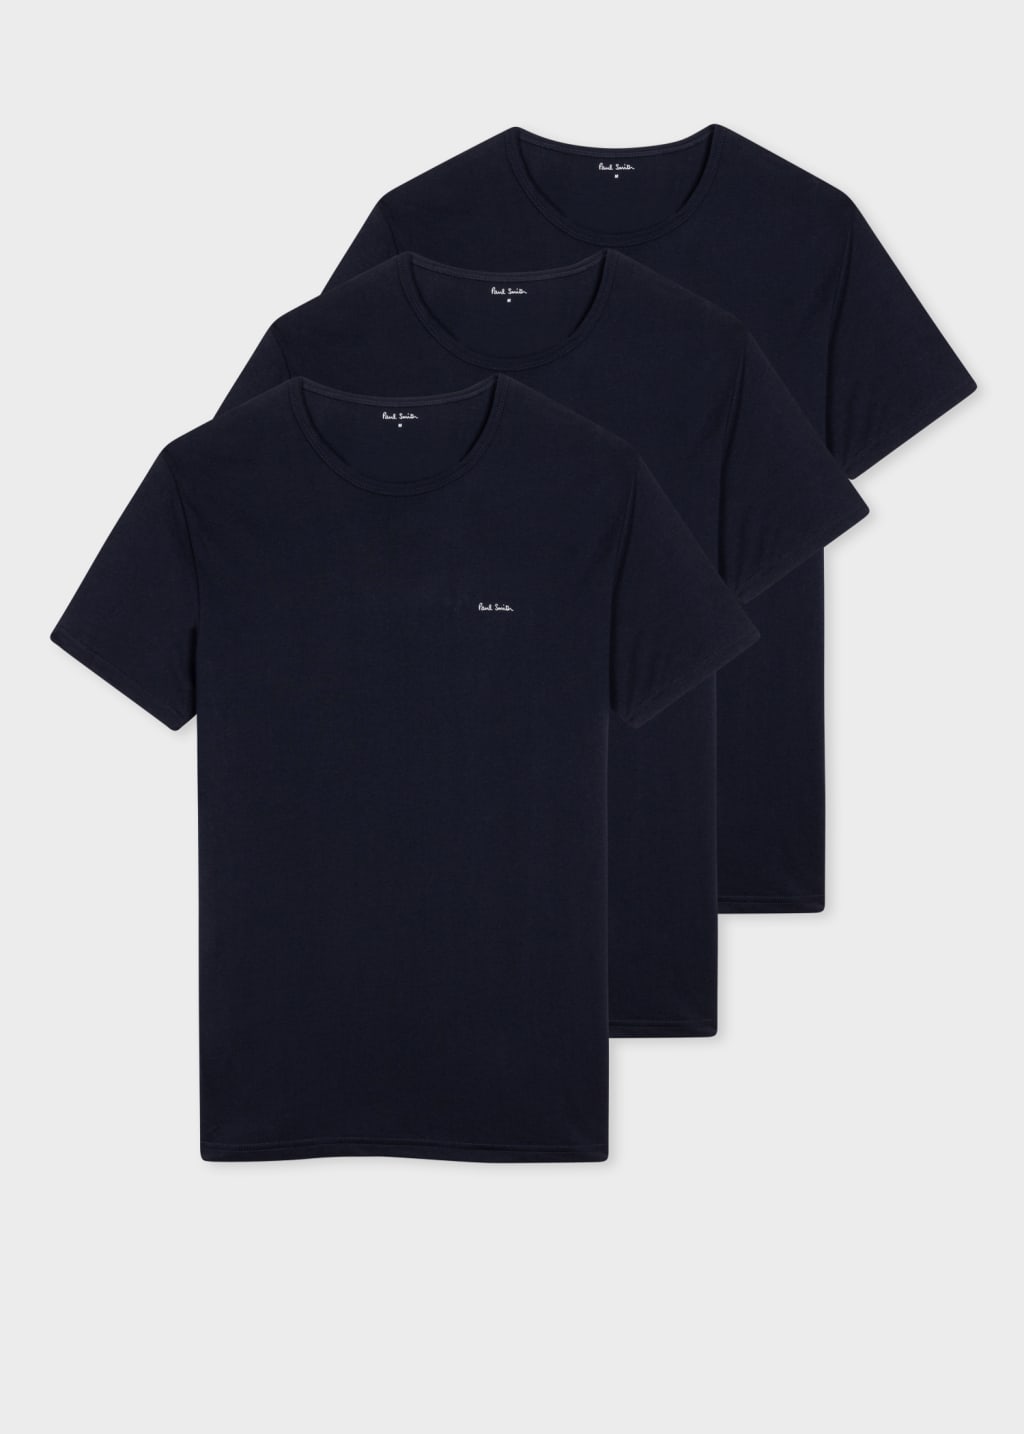 Front View - Navy Organic Cotton Lounge T-Shirts Three Pack Paul Smith